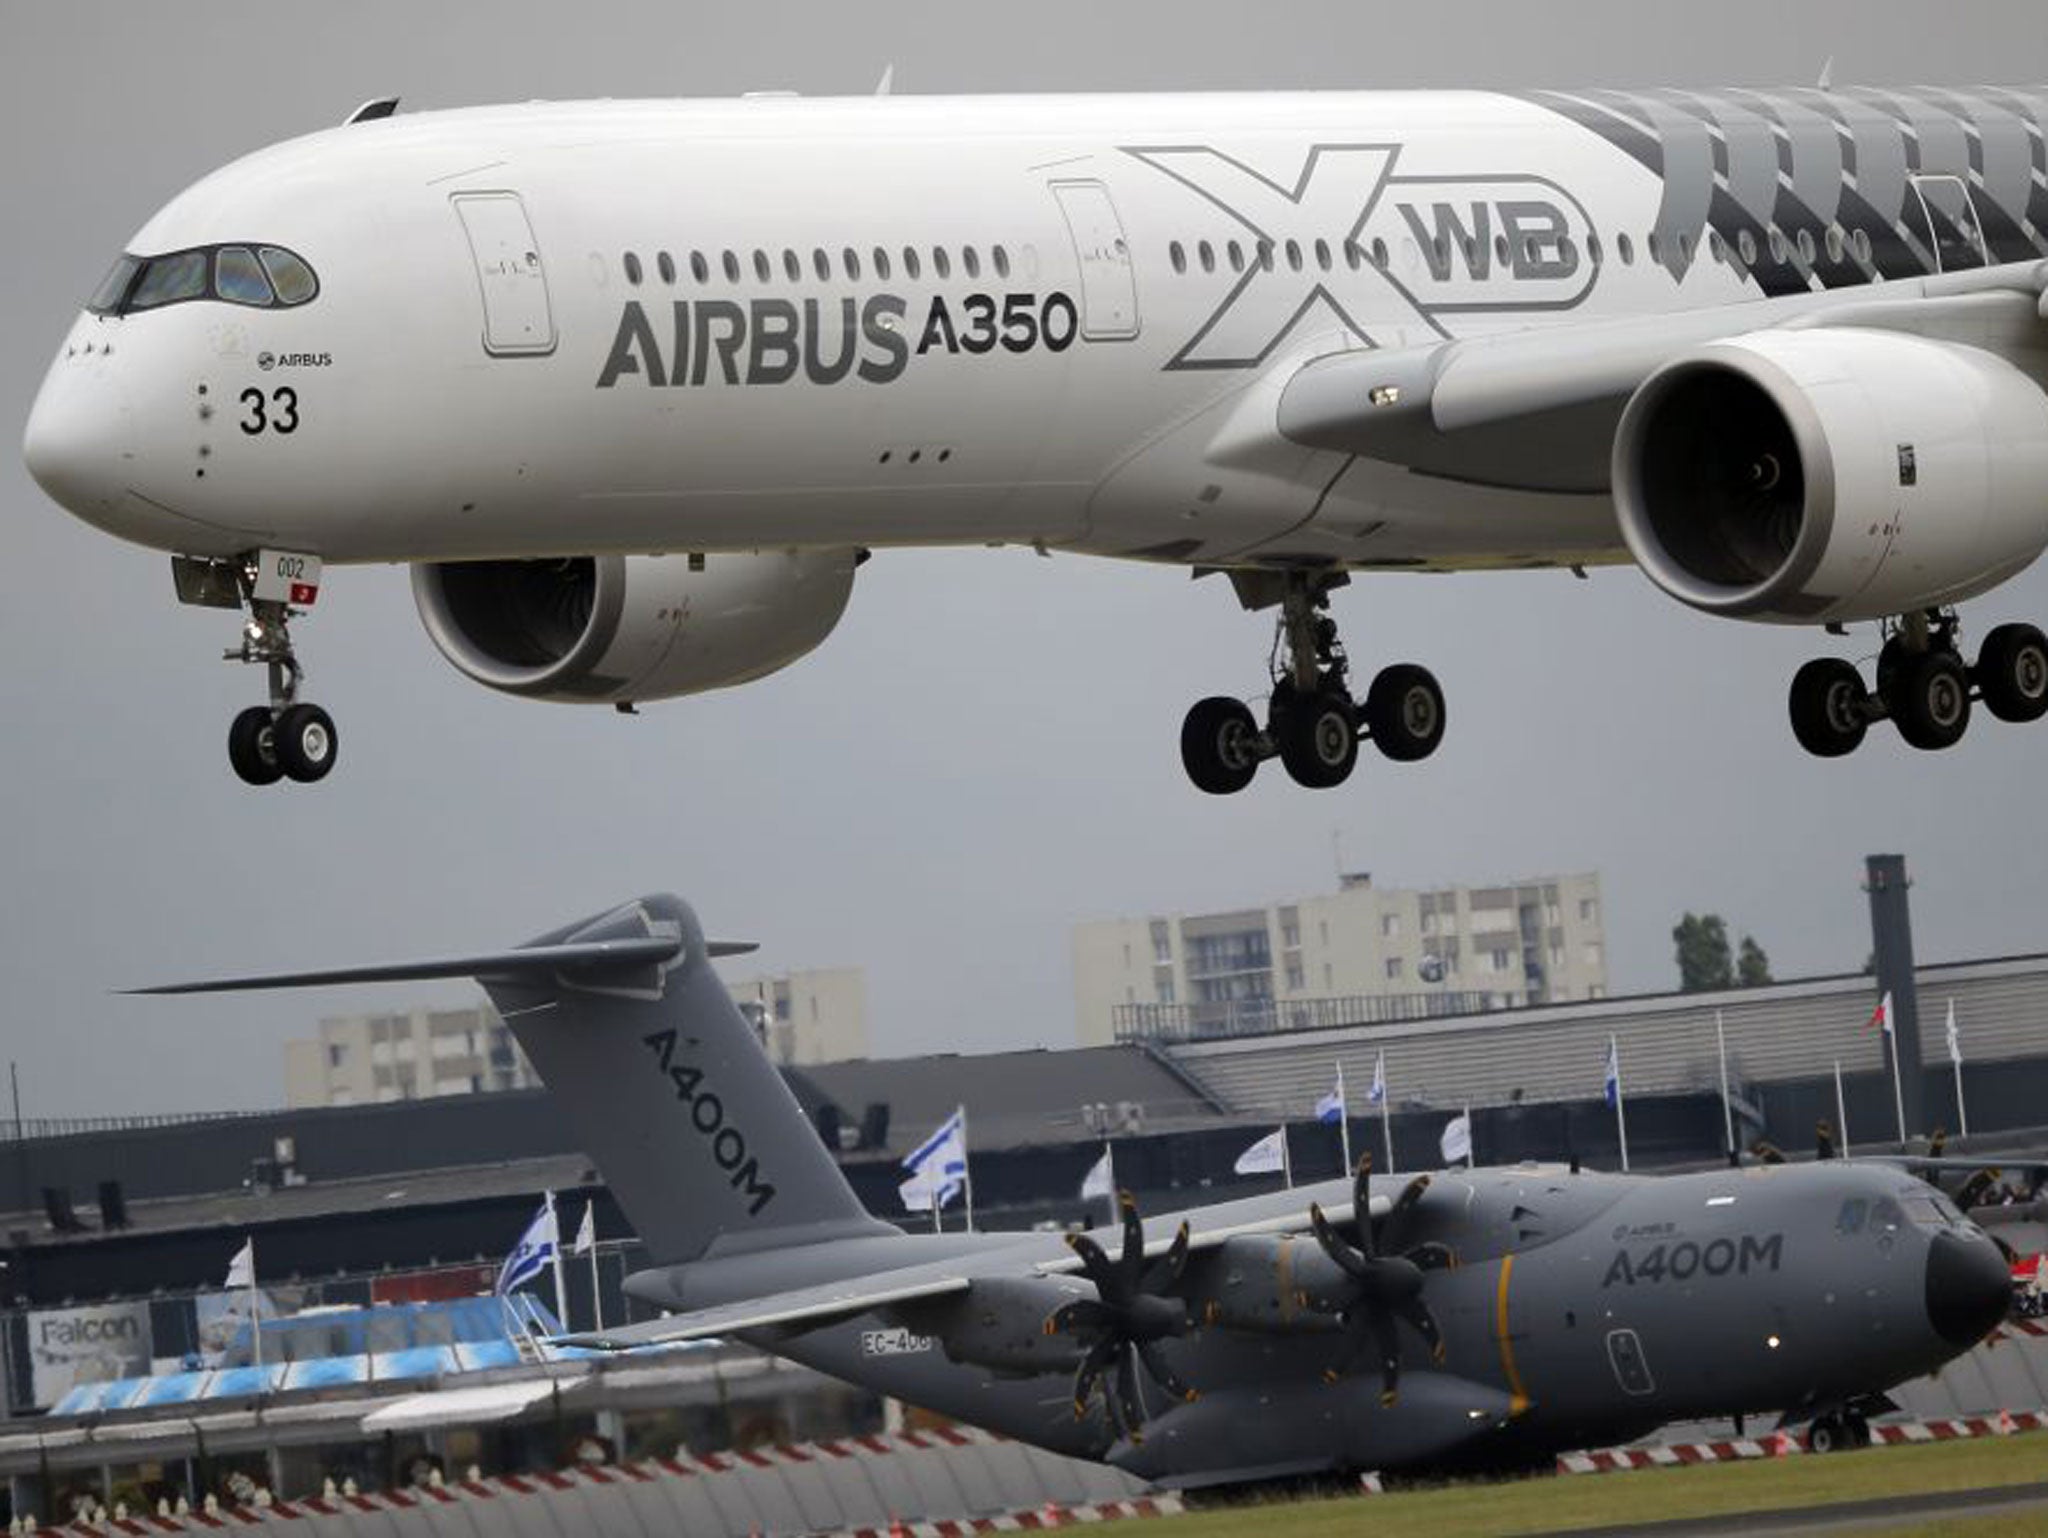 Airbus A350 comes in to land at the Paris Air Show